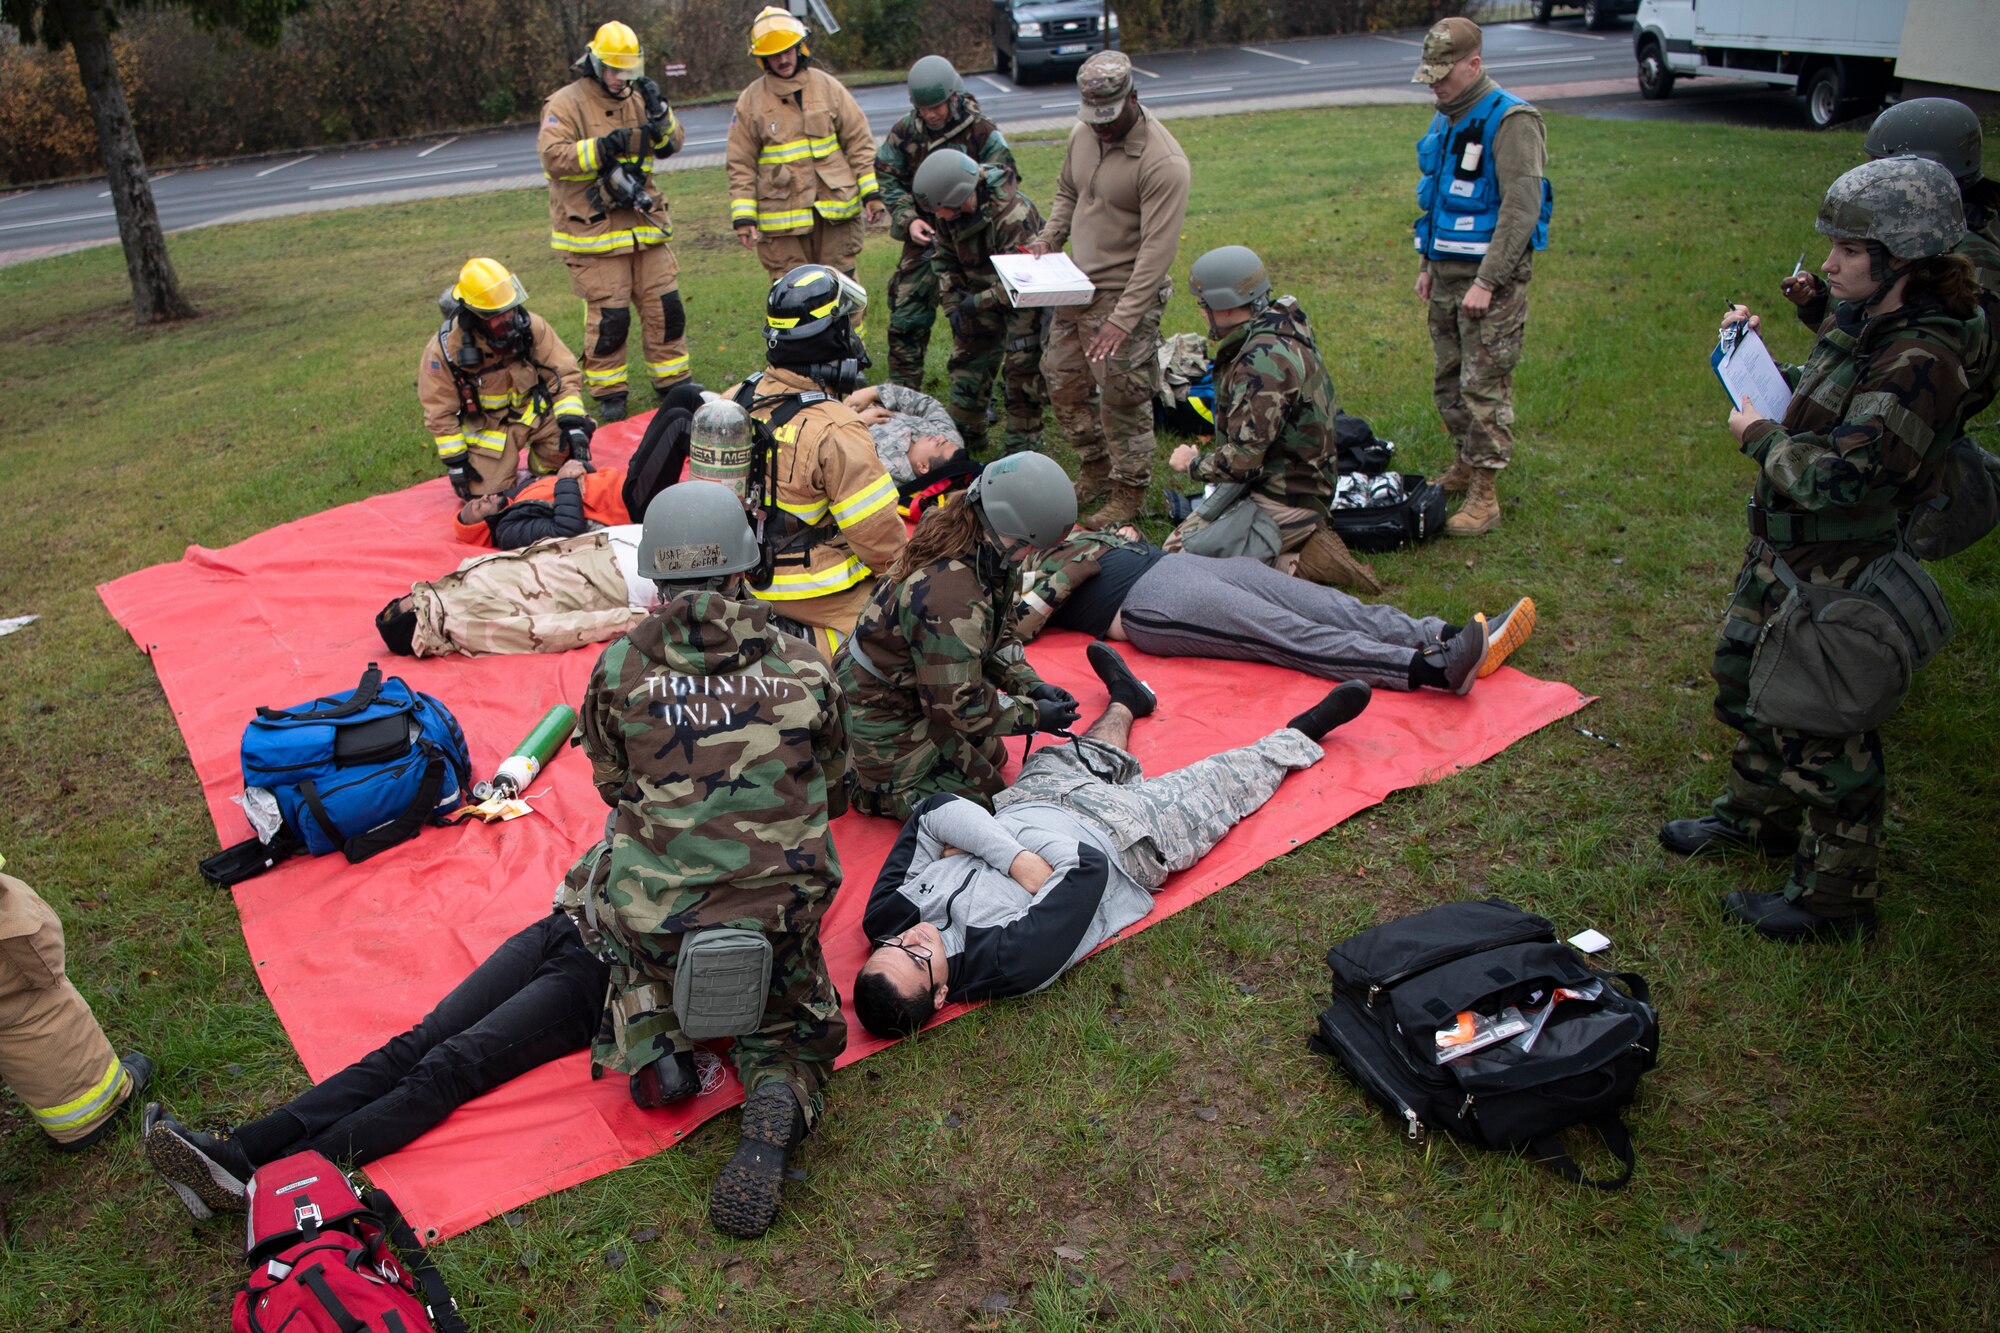 U.S. Air Force Airmen from the 52nd Fighter Wing respond to a simulated mass casualty exercise Nov. 4, 2021, on Spangdahlem Air Base, Germany. 52nd FW hosted exercise Sabre Storm, which tested the readiness and responsiveness of 52nd FW Airmen. (U.S. Air Force photo by Staff Sgt. Melody W. Howley)